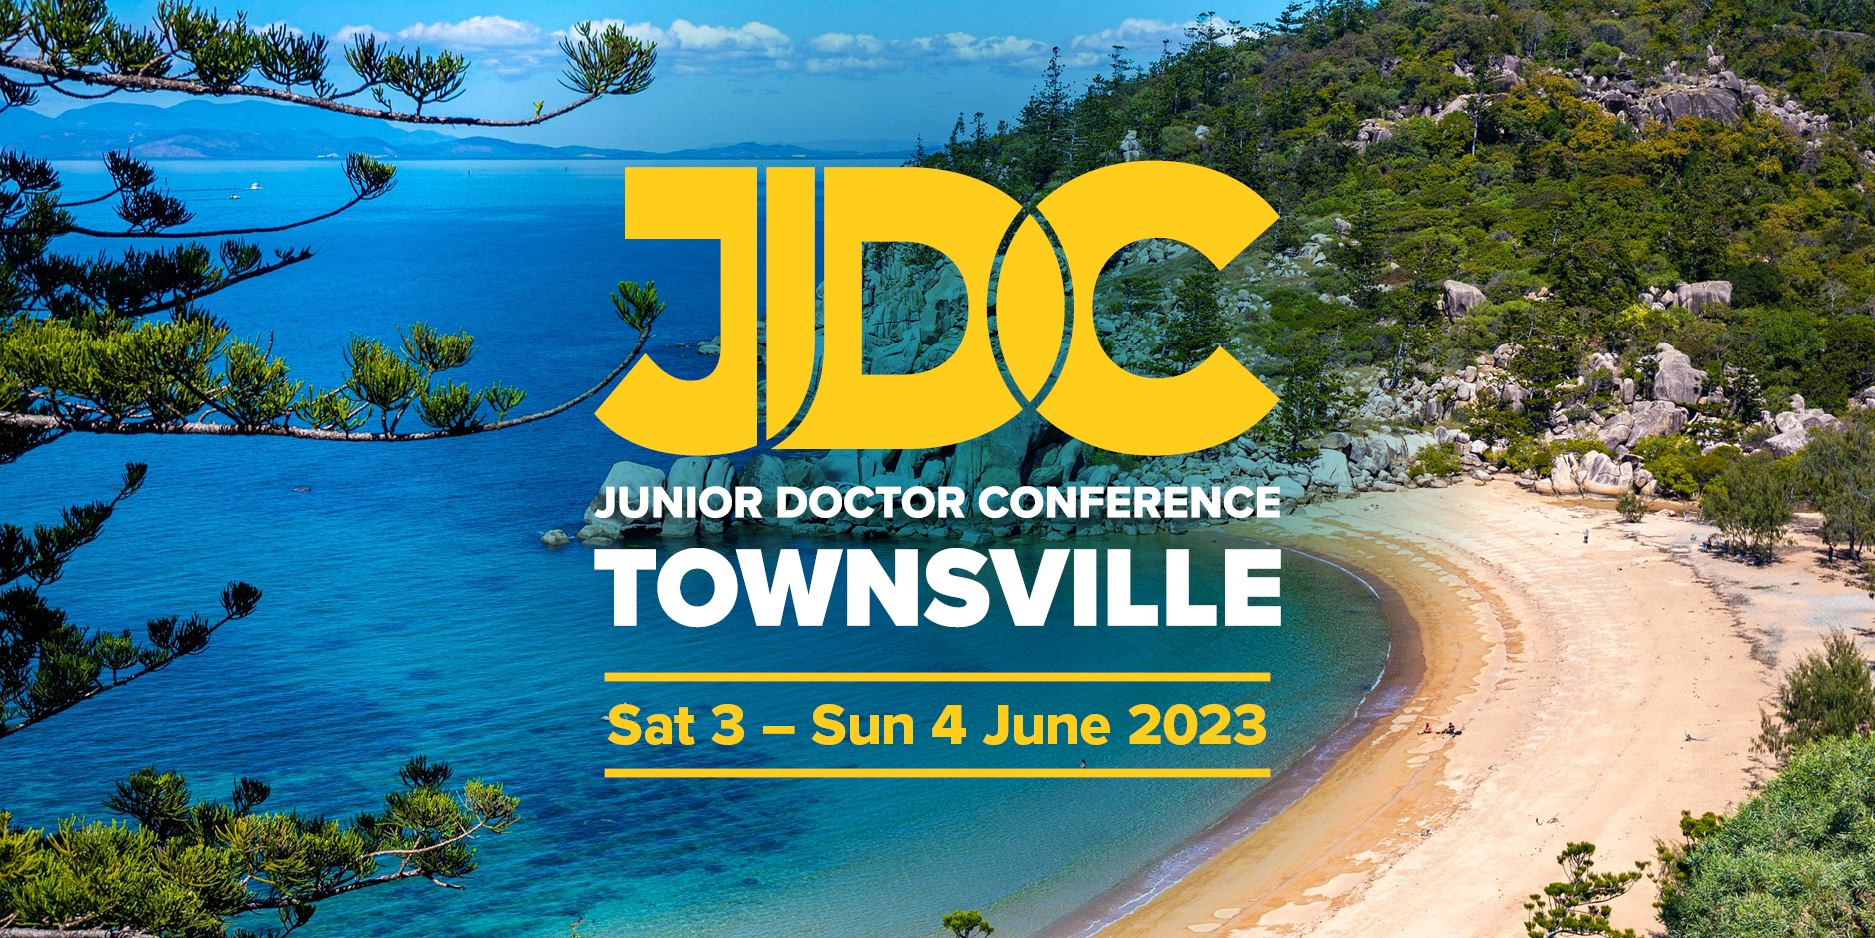 Junior Doctor Conference, Townsville